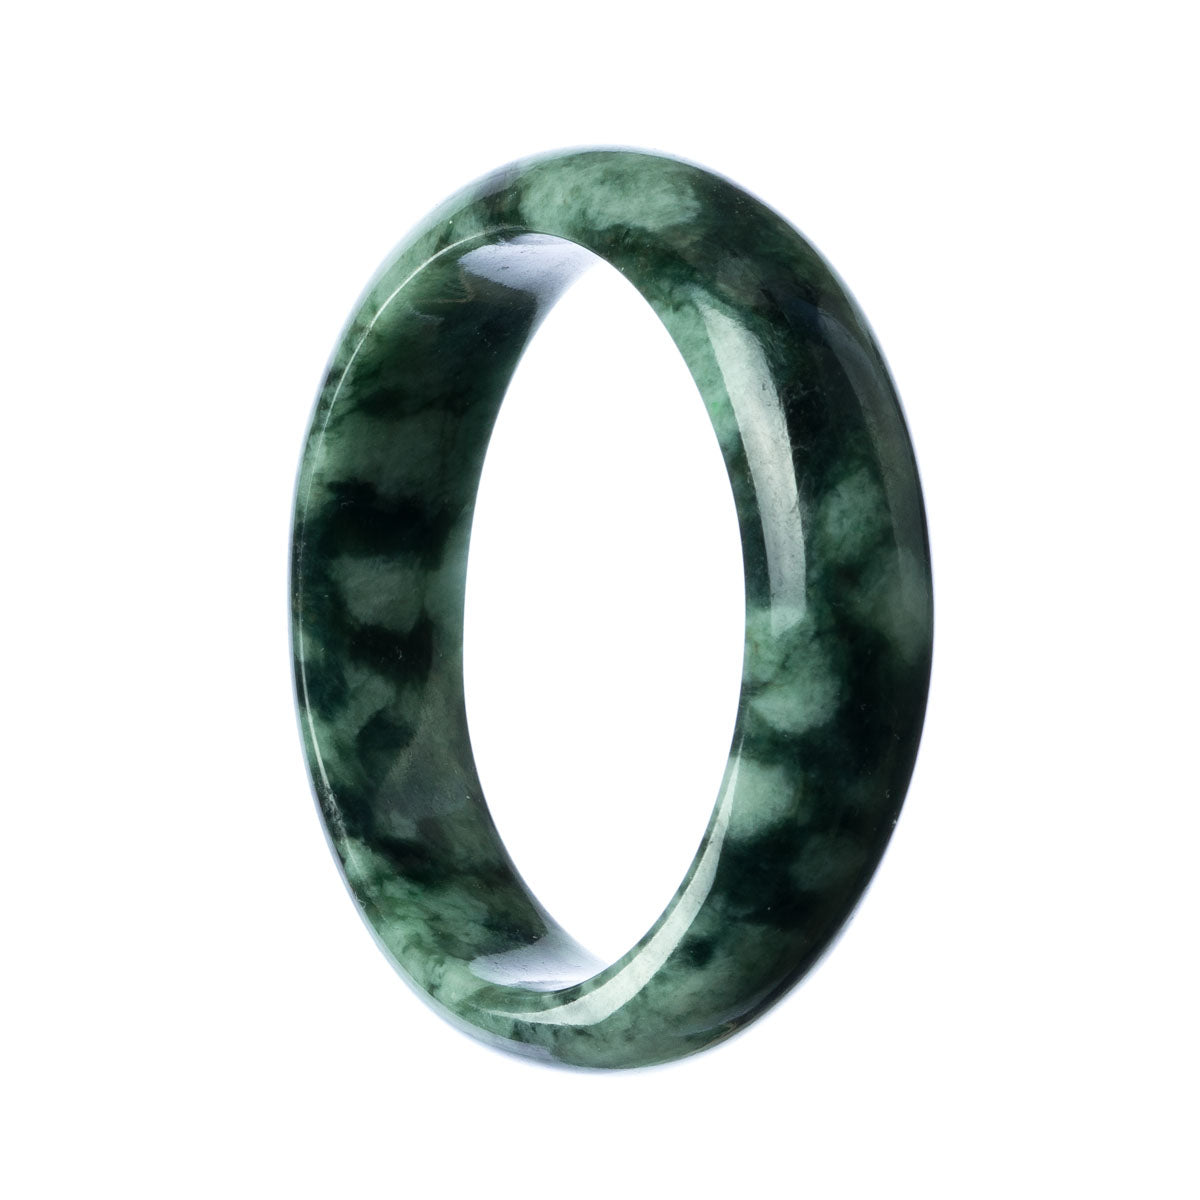 A close-up image of a half moon shaped jade bracelet, with a vibrant green color. The bracelet is made of untreated jade and is certified for its authenticity. It measures 58mm in size. The brand name "MAYS™" is also mentioned.